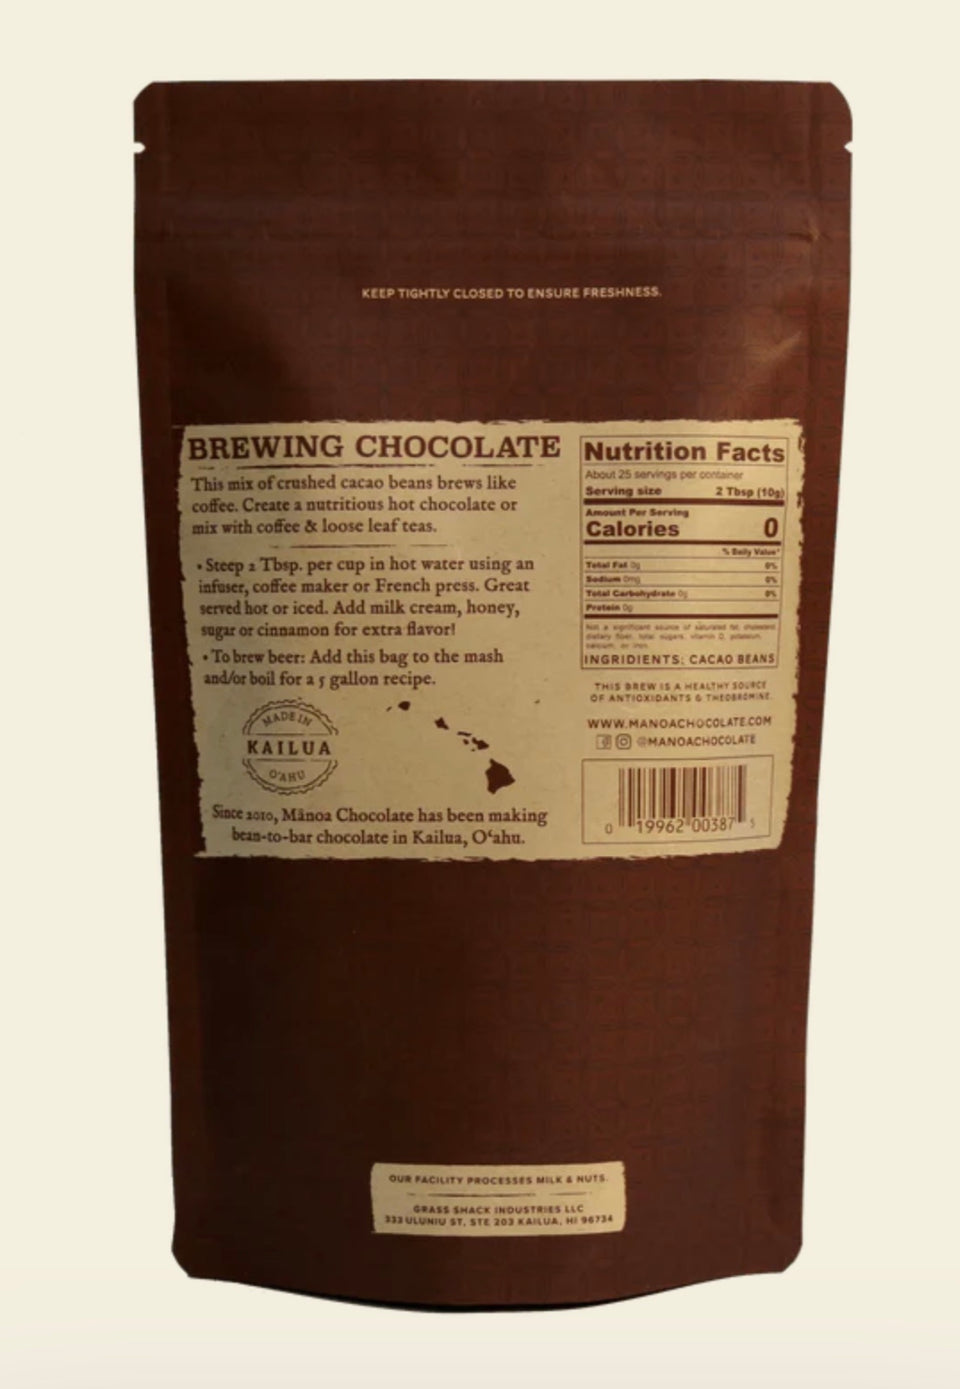 back label of brewing chocolate bag